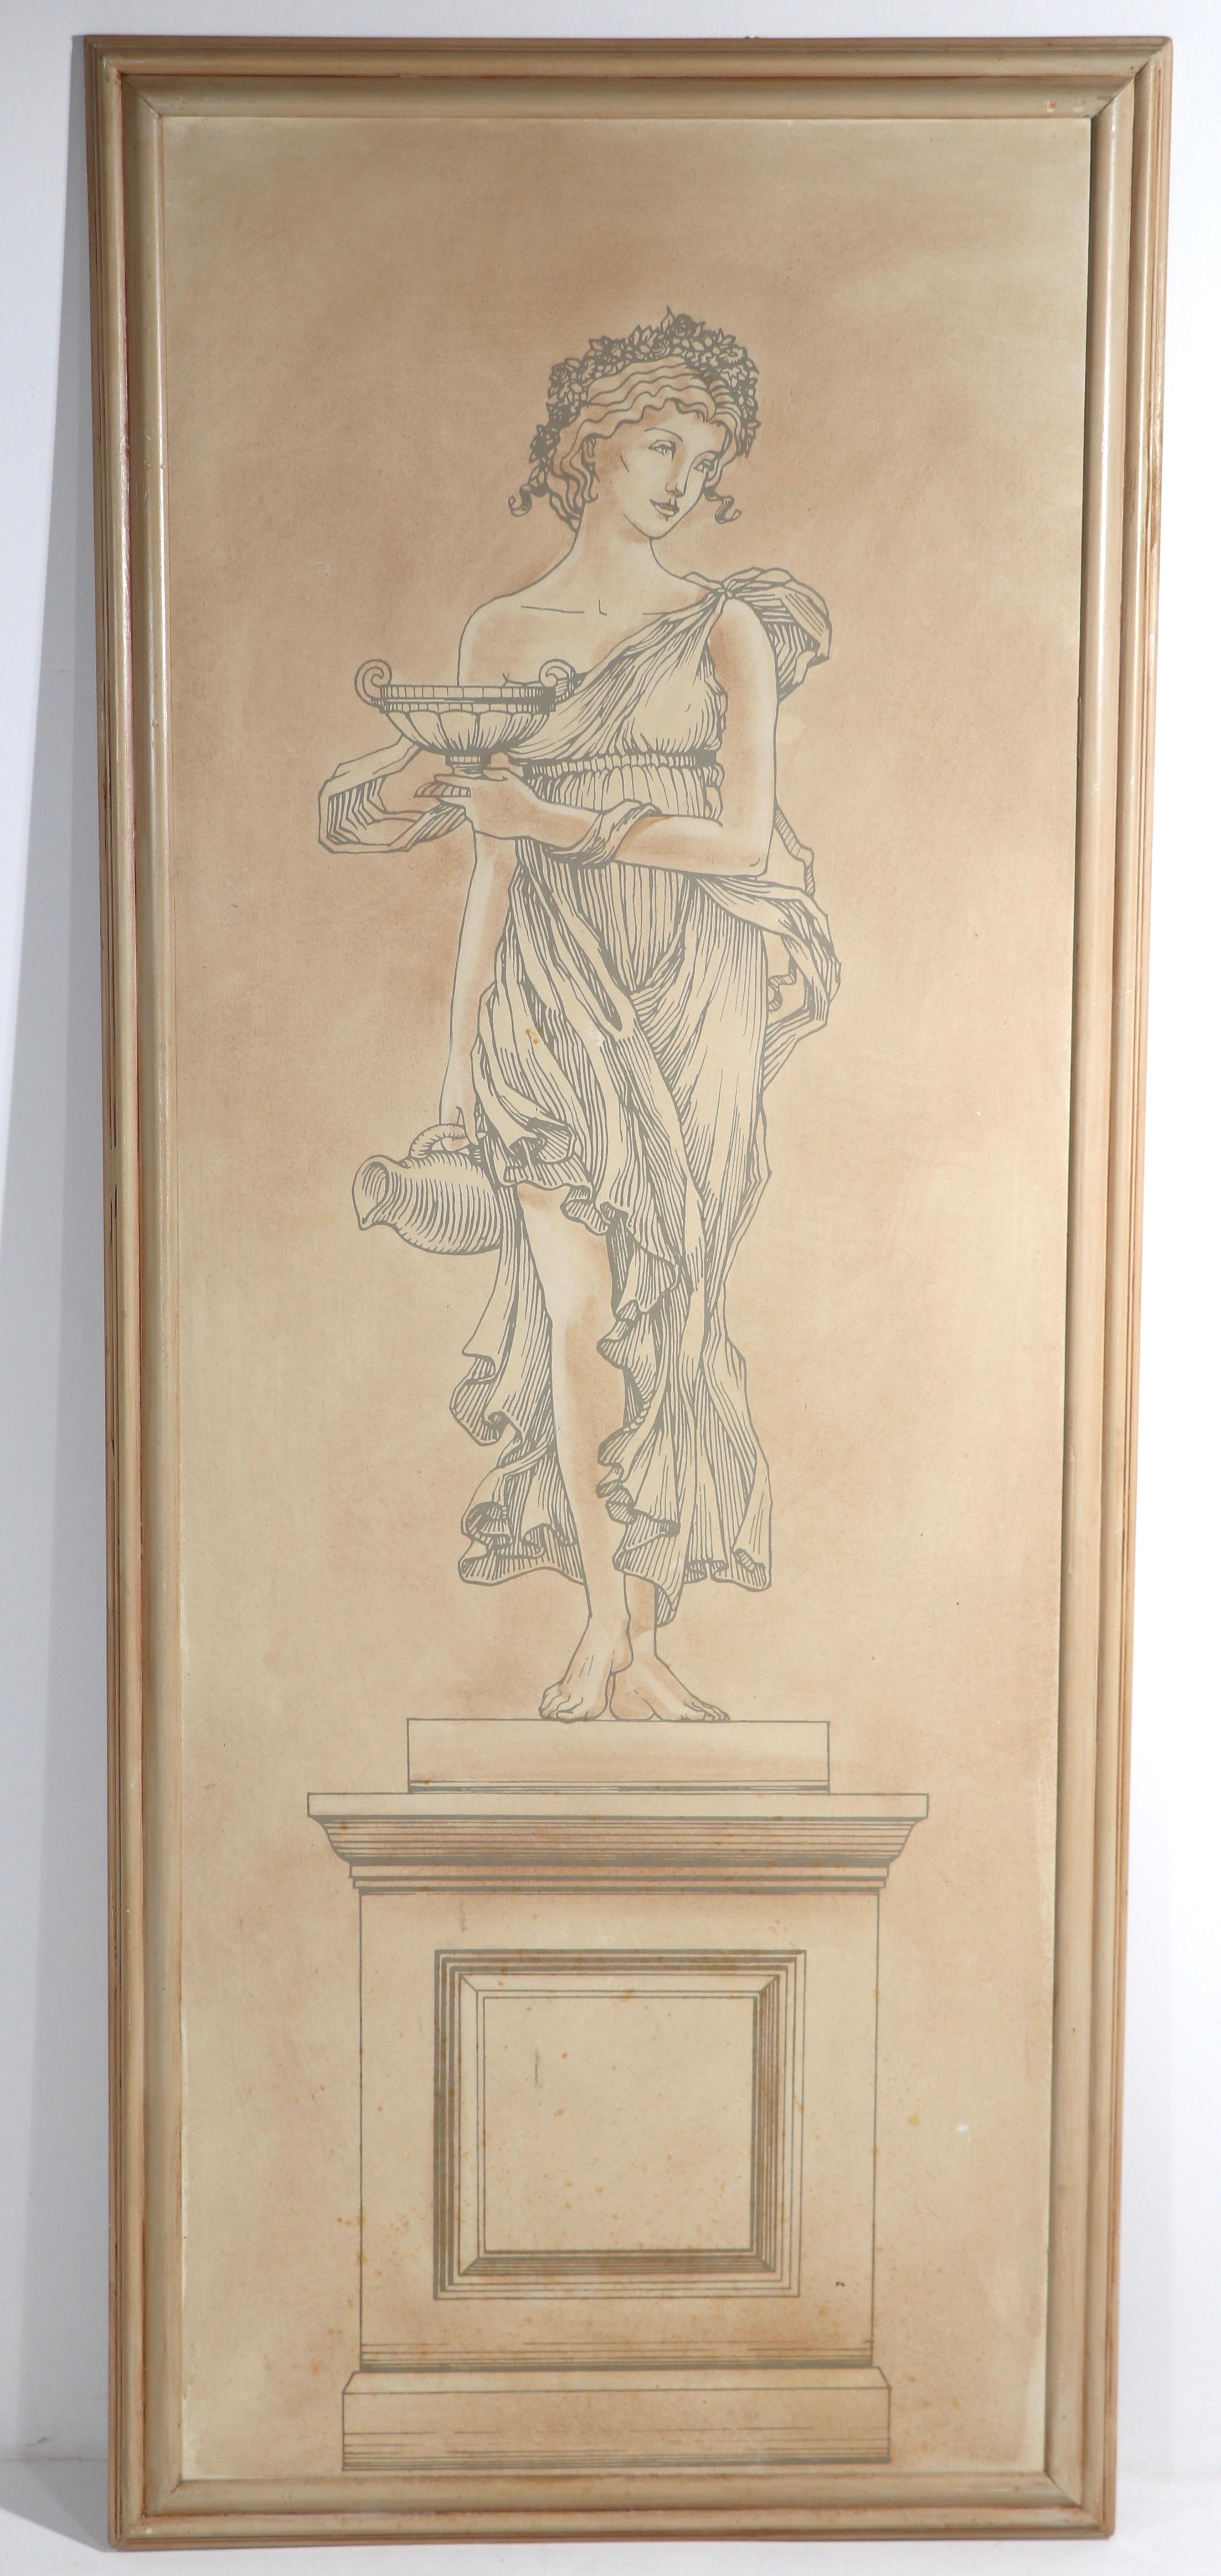 This interesting print was probably part of a scene for a film, or TV production. The subject is a classical statue of a woman in a flowing dress, holding a pitcher and a bowl. The print is marked 